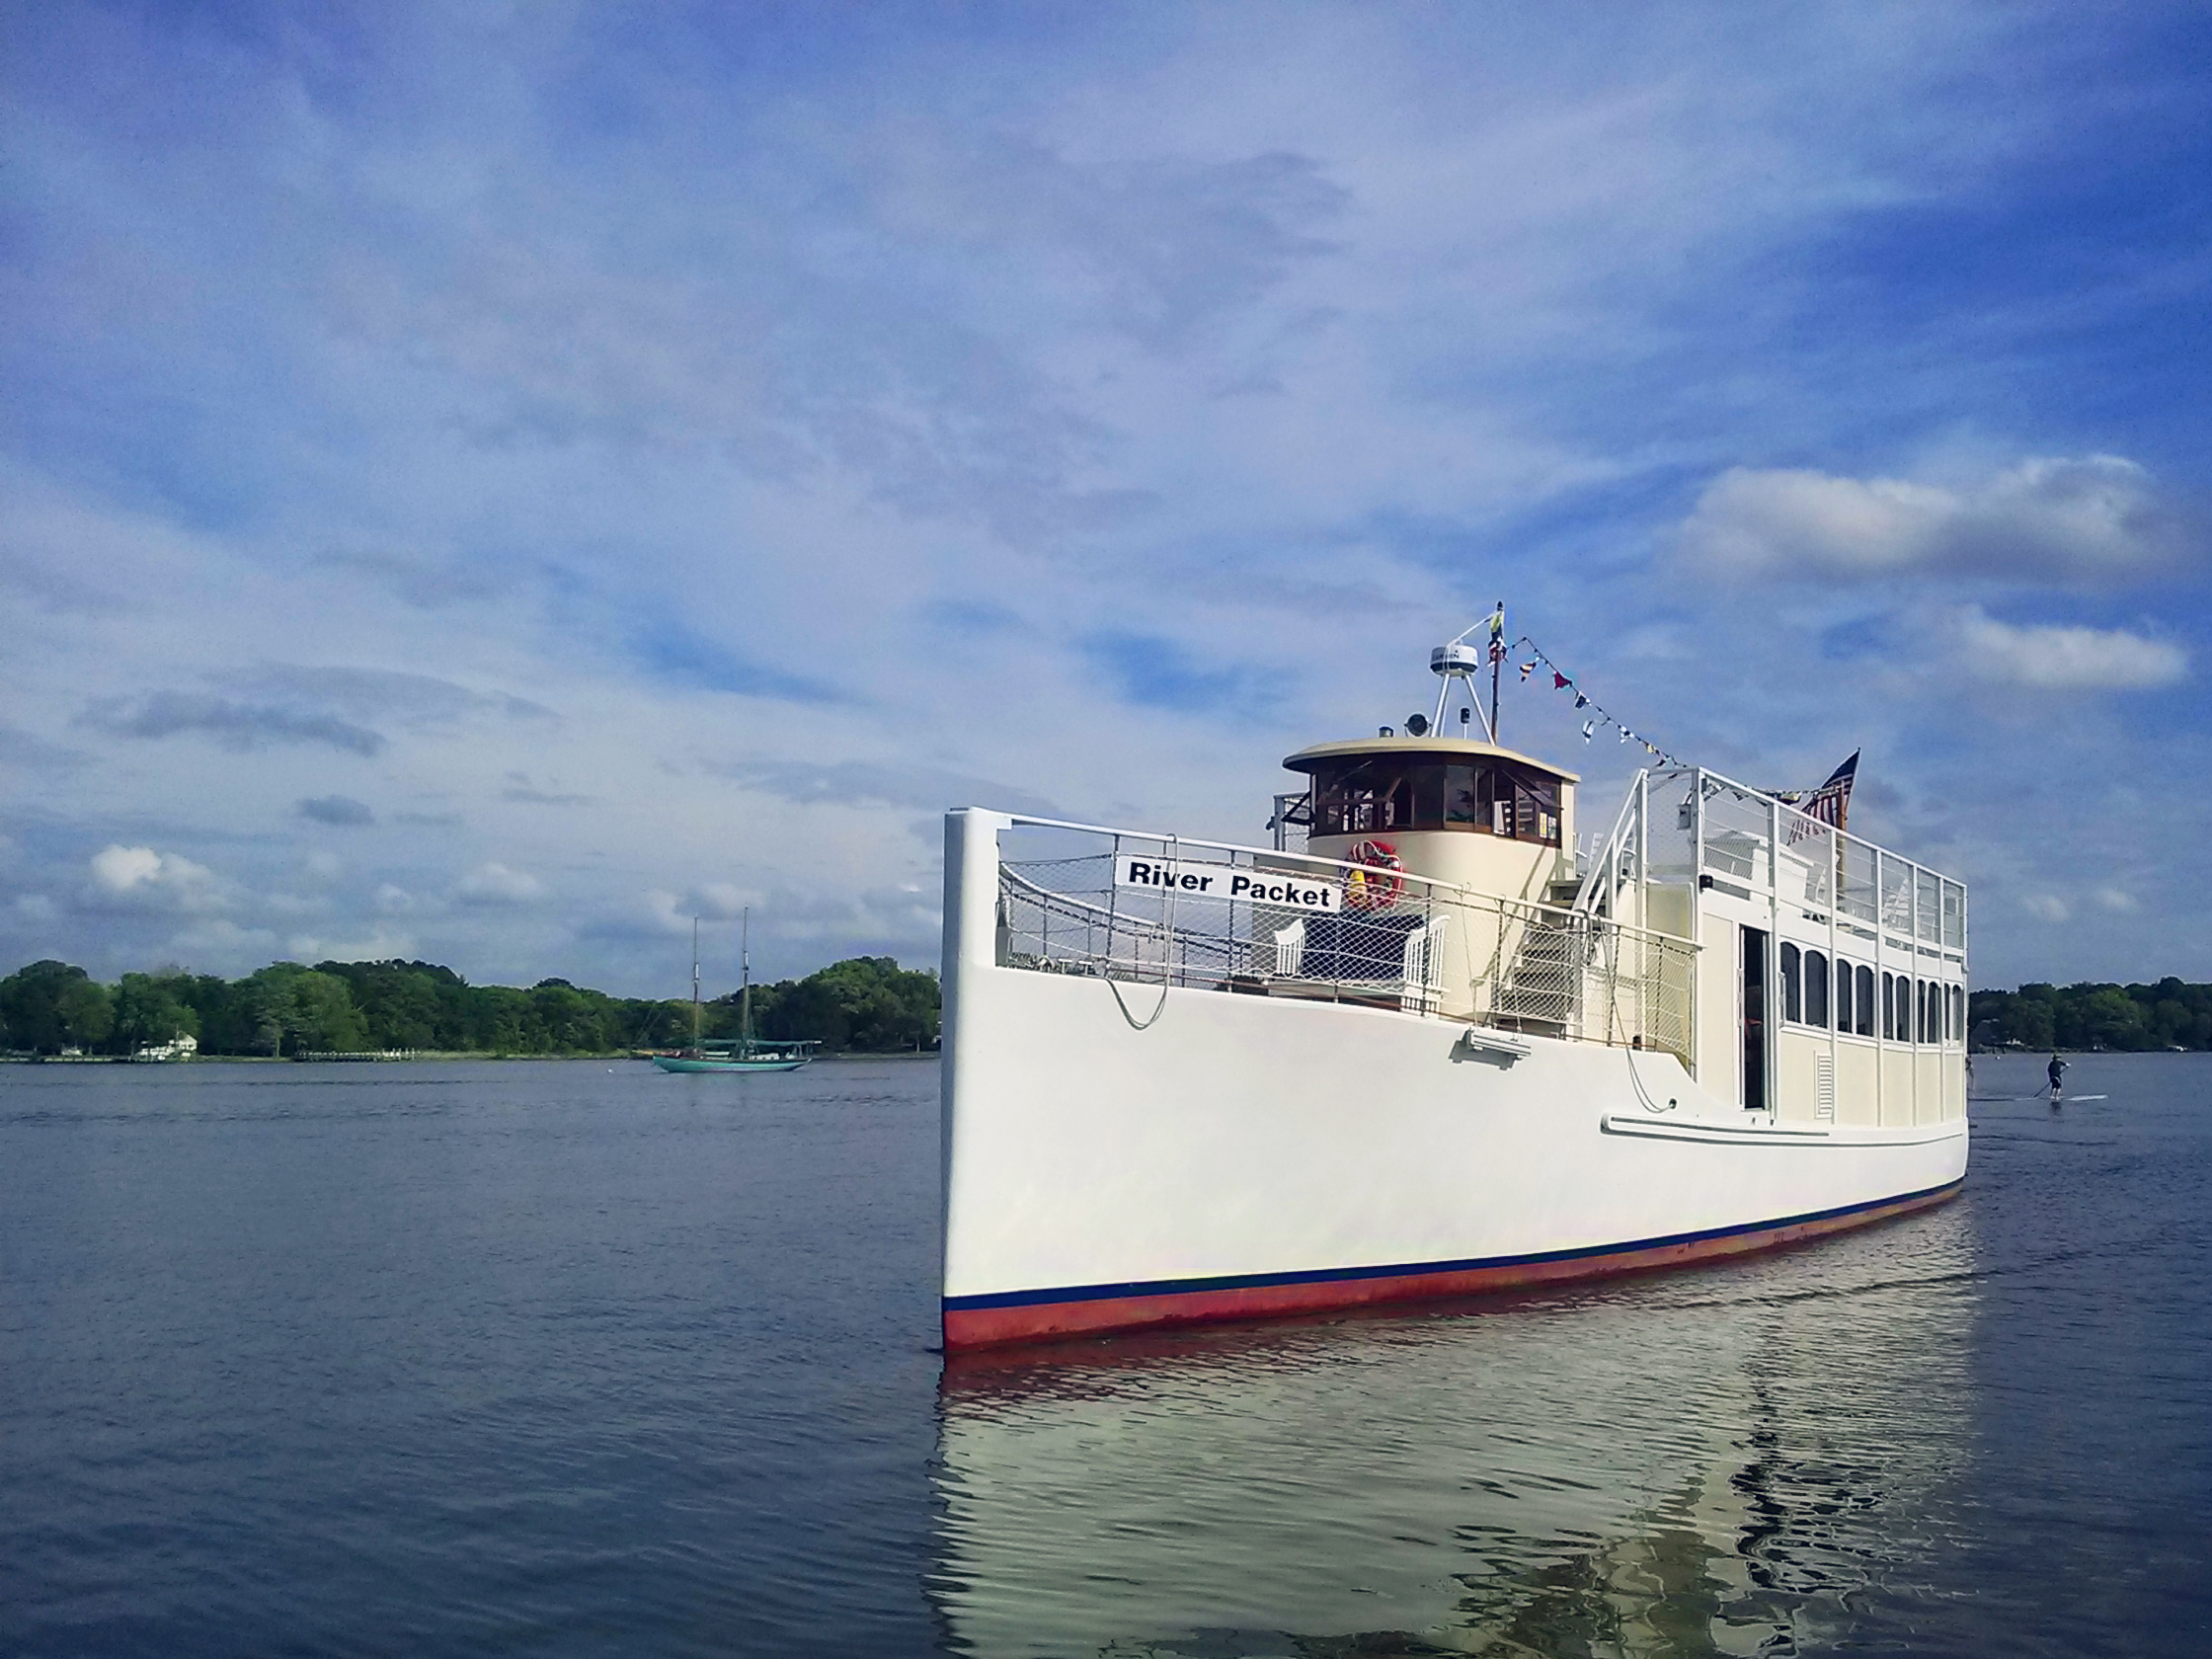 Father's Day Cruise on the River Packet